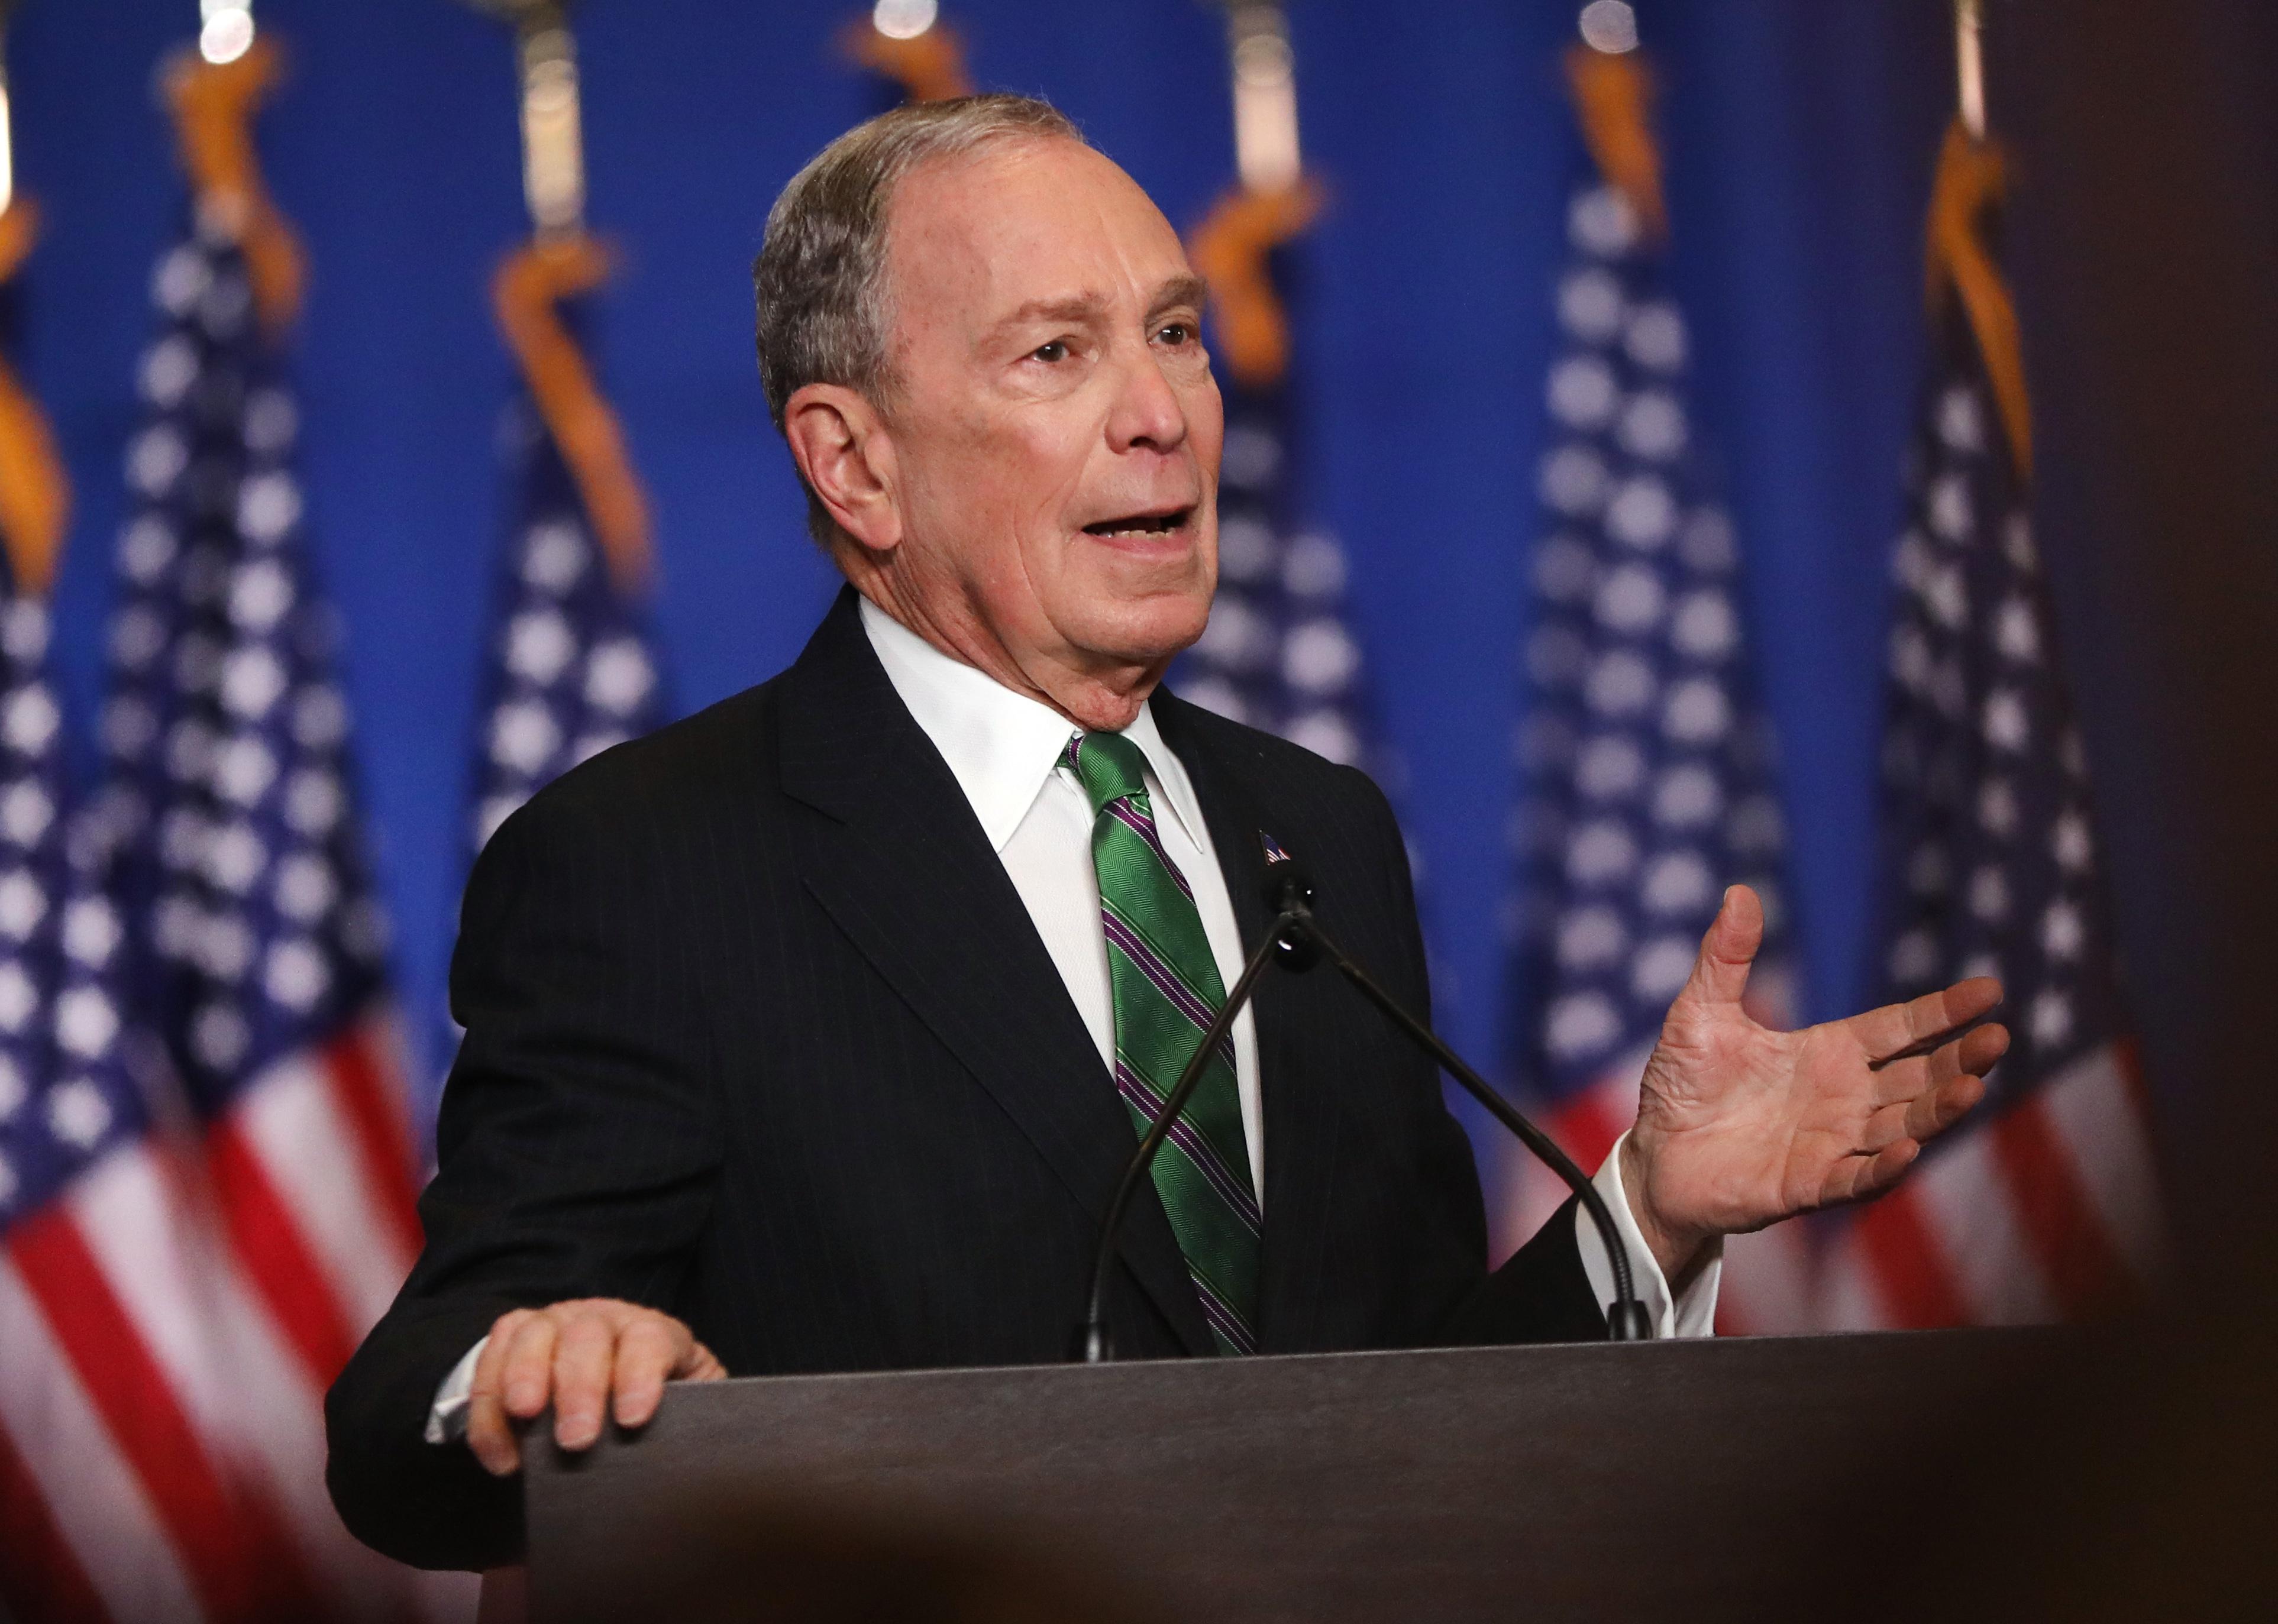 Michael Bloomberg giving a speech onstage.